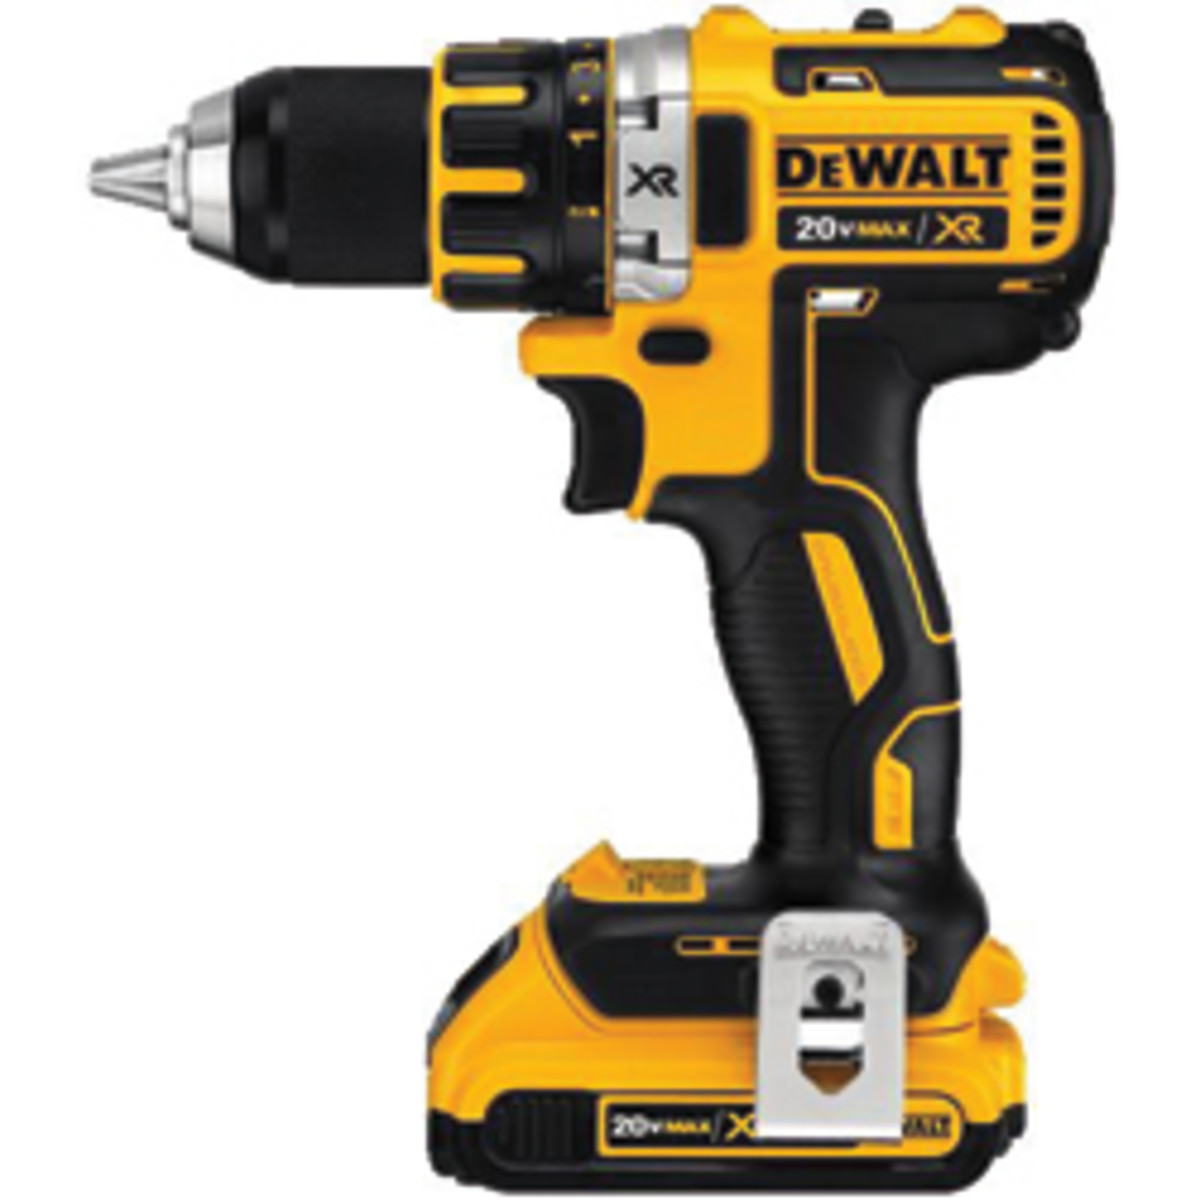 DeWalt's new 20-volt Max XR drill/driver, featuring a brushless motor.